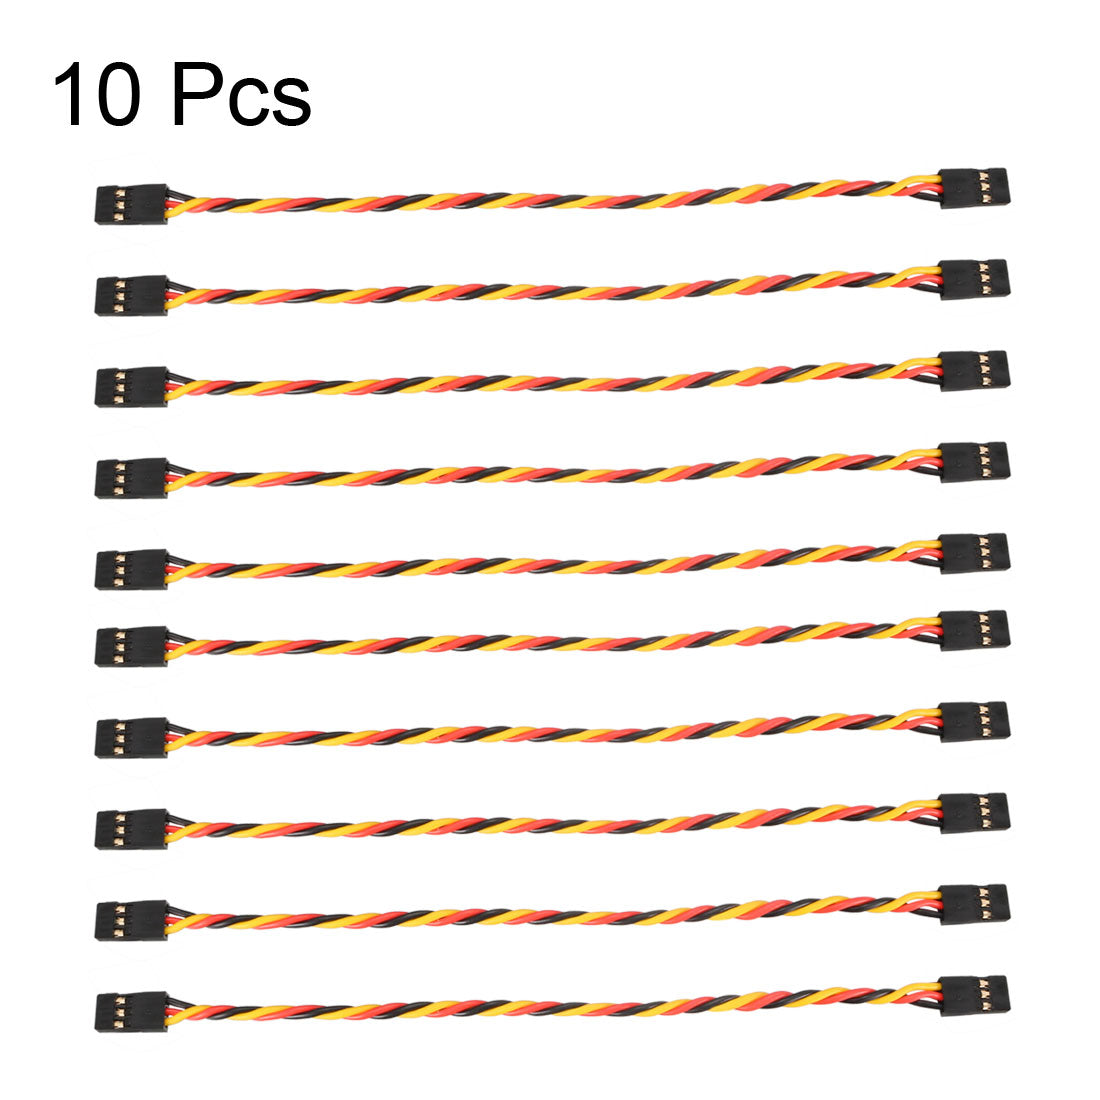 uxcell Uxcell 10Pcs 23.5CM 3-Pin Male to Male Twisted Servo Extension Cable Cord Connectors, 22AWG 60-Cores Wire for RC Futaba JR Servo